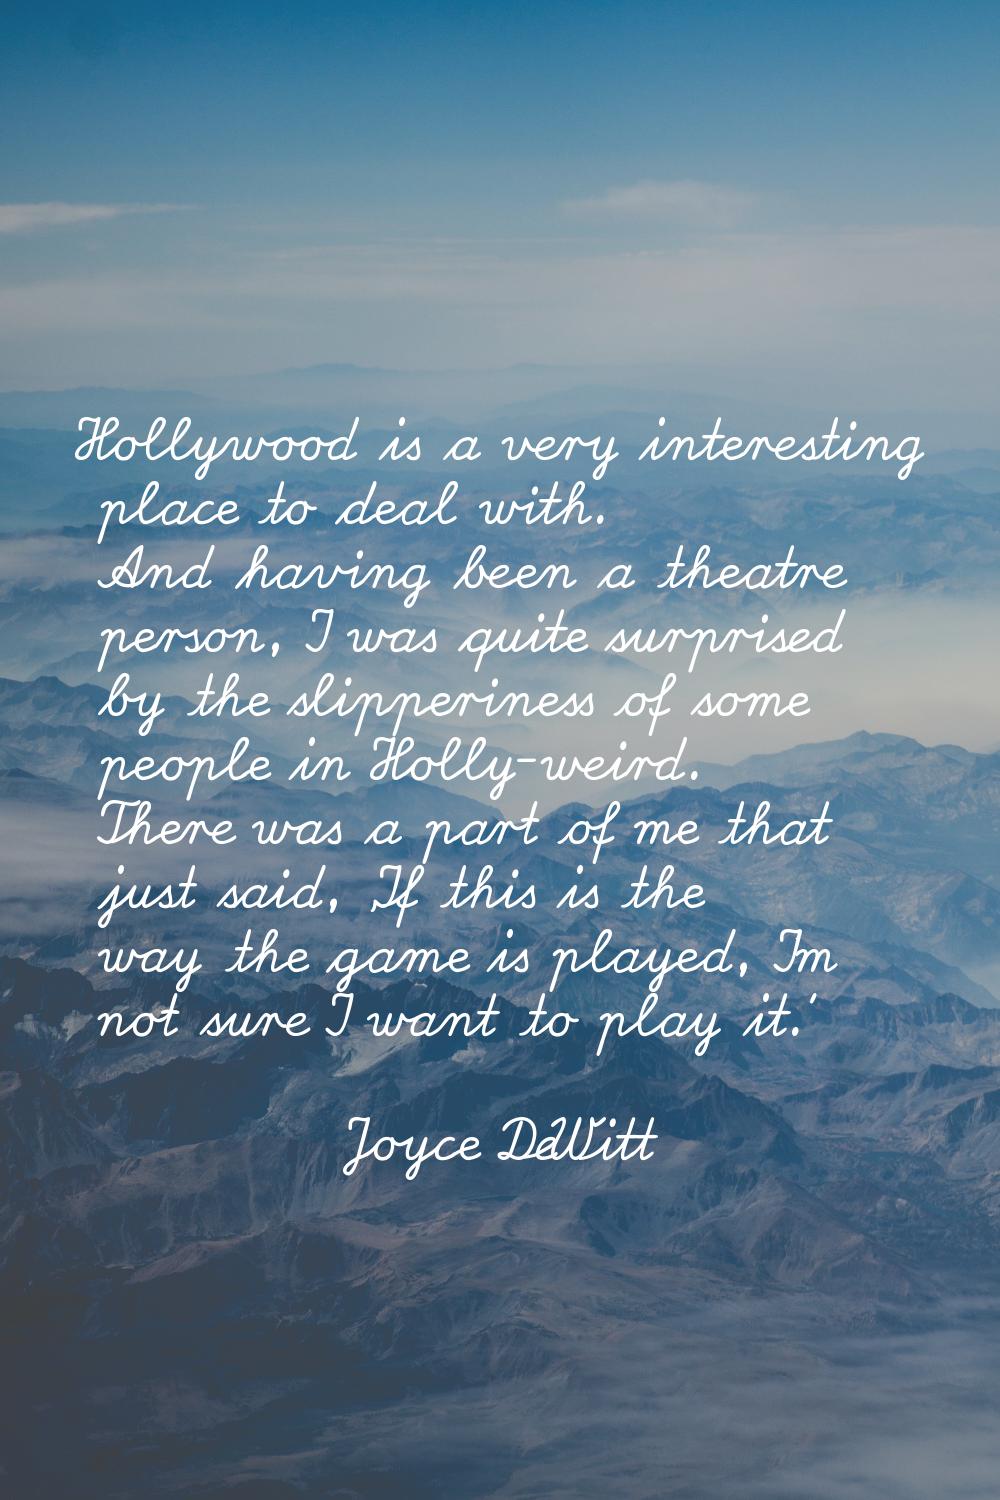 Hollywood is a very interesting place to deal with. And having been a theatre person, I was quite s